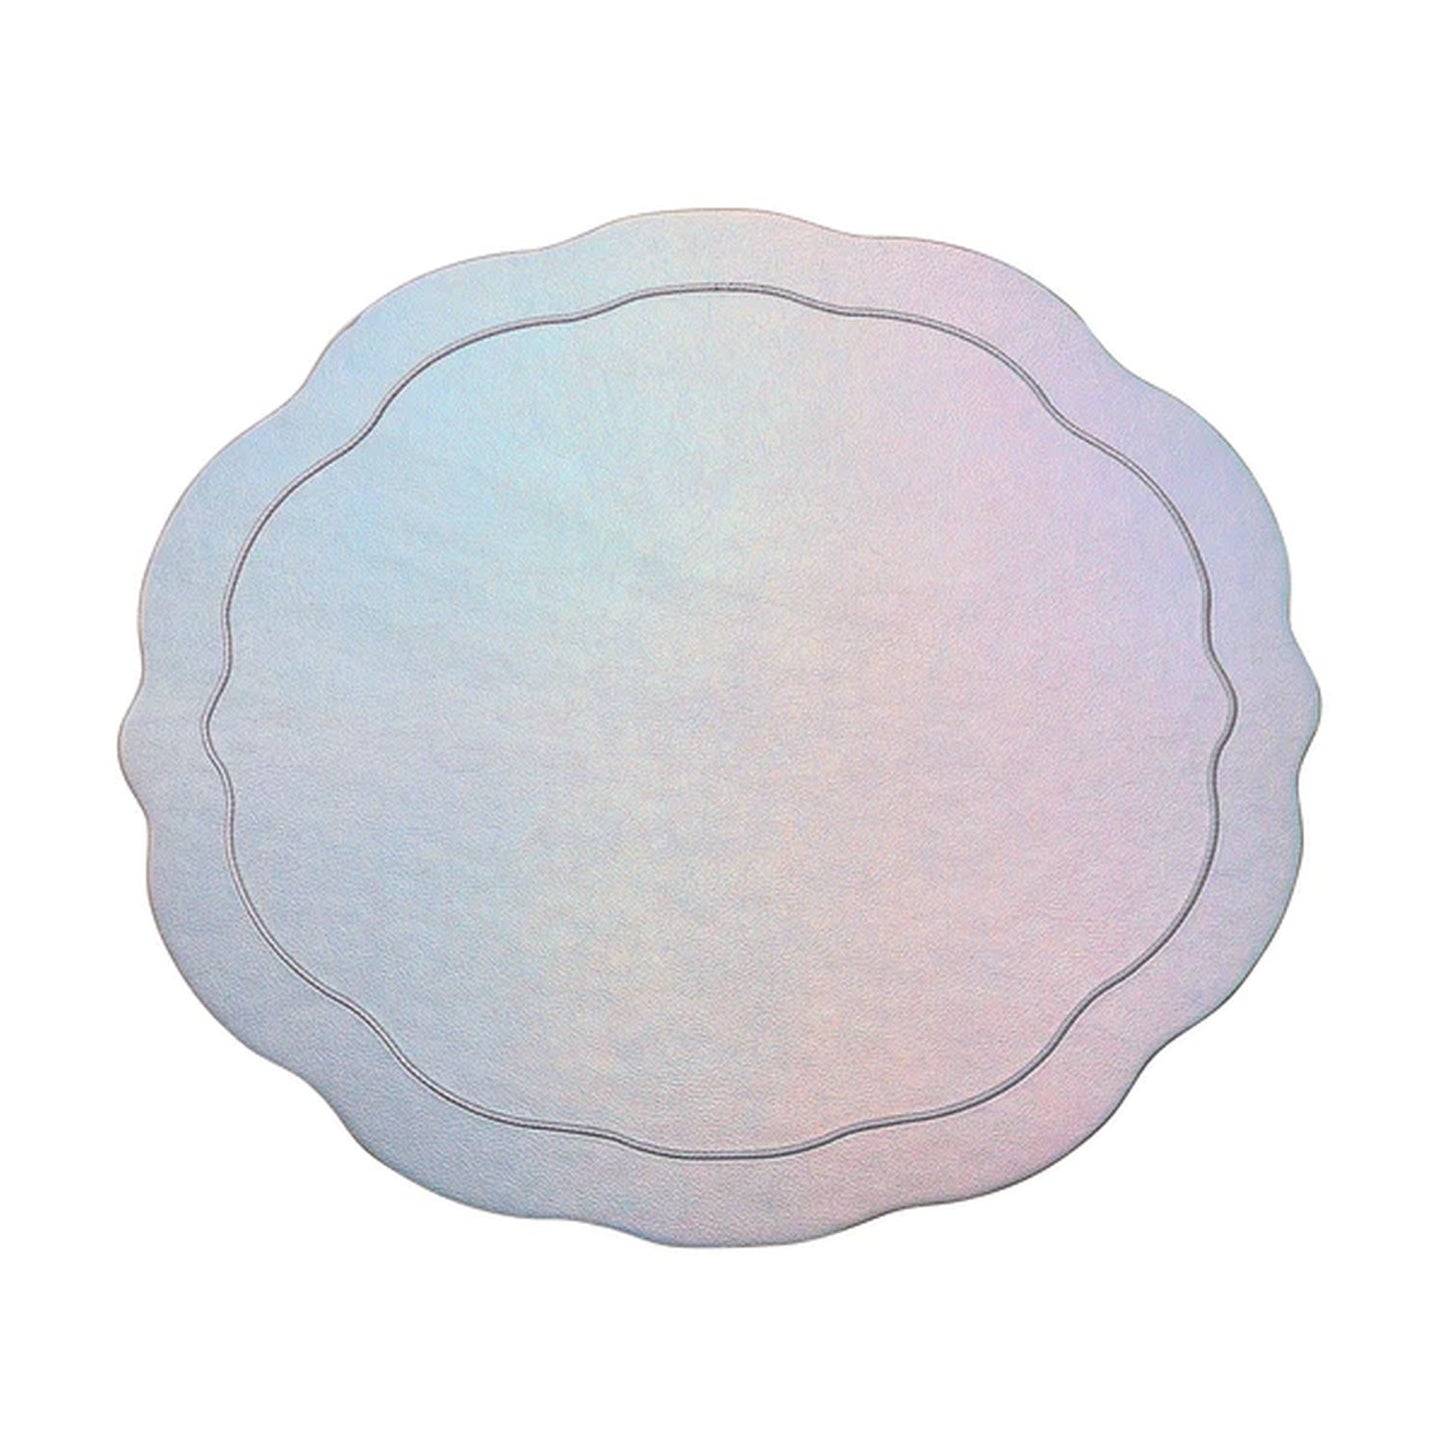 Kim Seybert Tailored Placemat in Iridescent & Silver, Set of 4